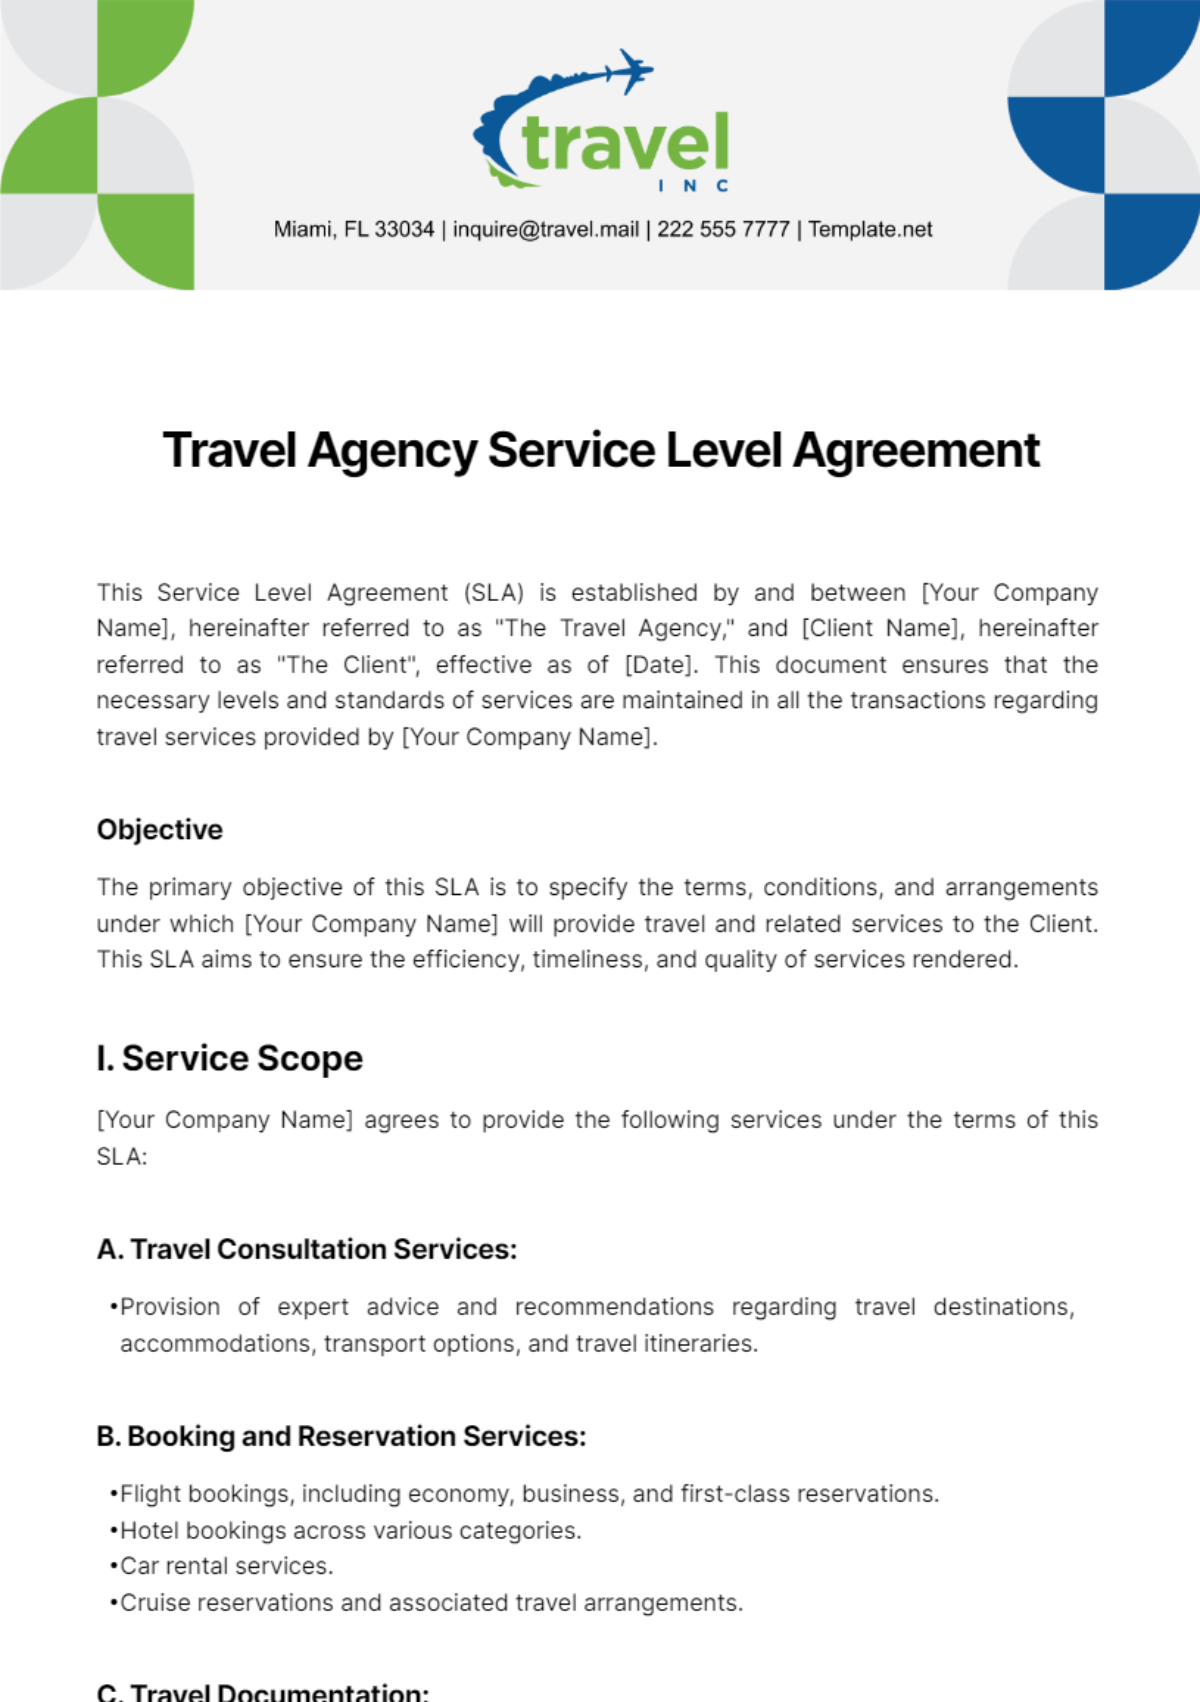 Travel Agency Service Level Agreement Template